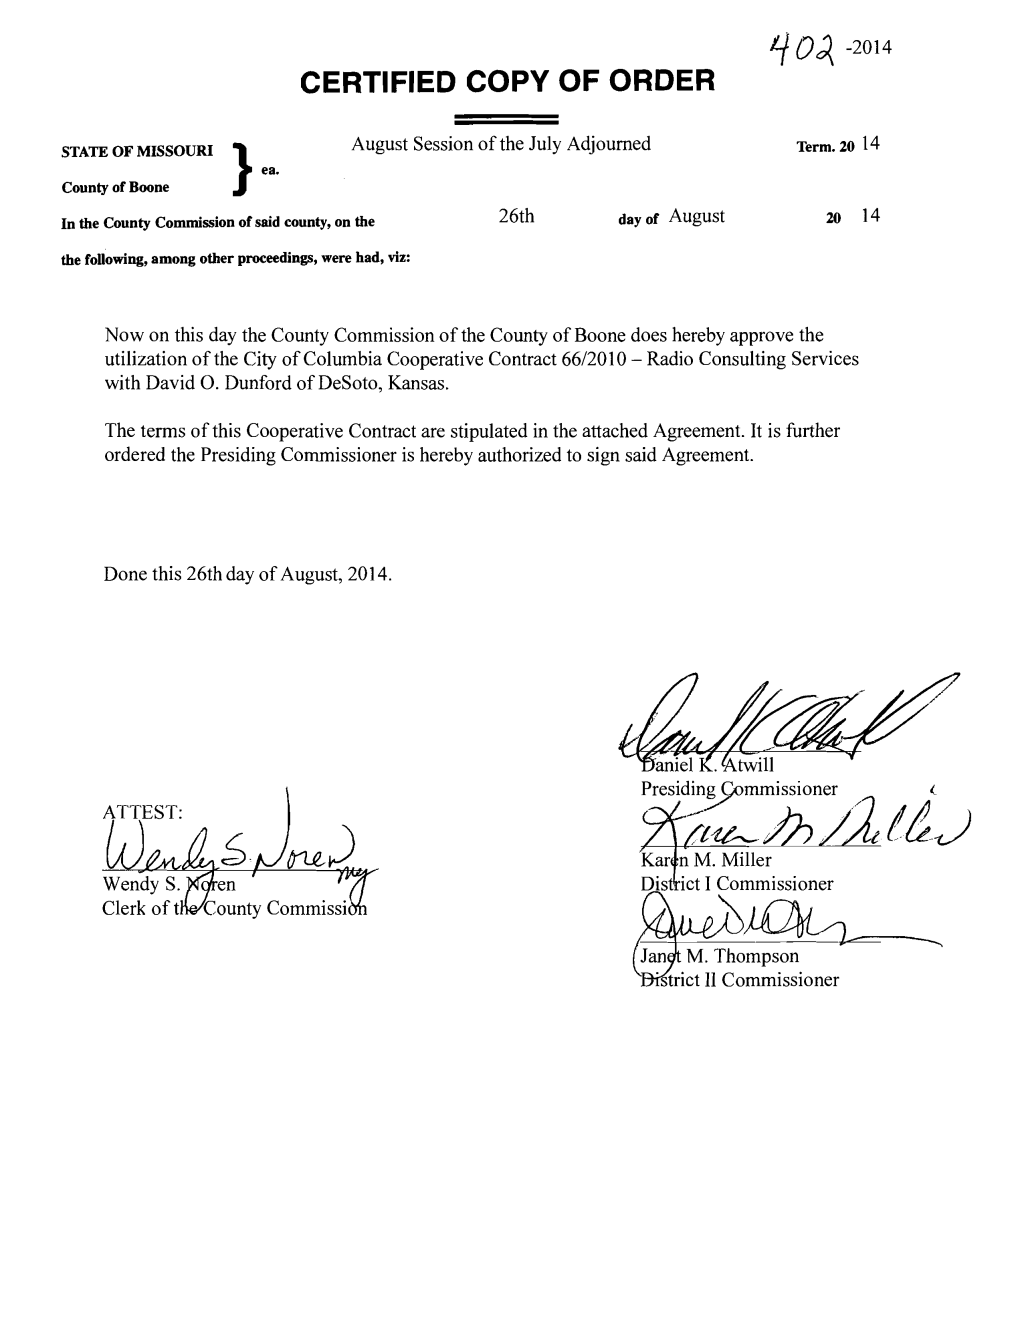 Boone County Commission Orders, August 26, 2014 CO 402-407